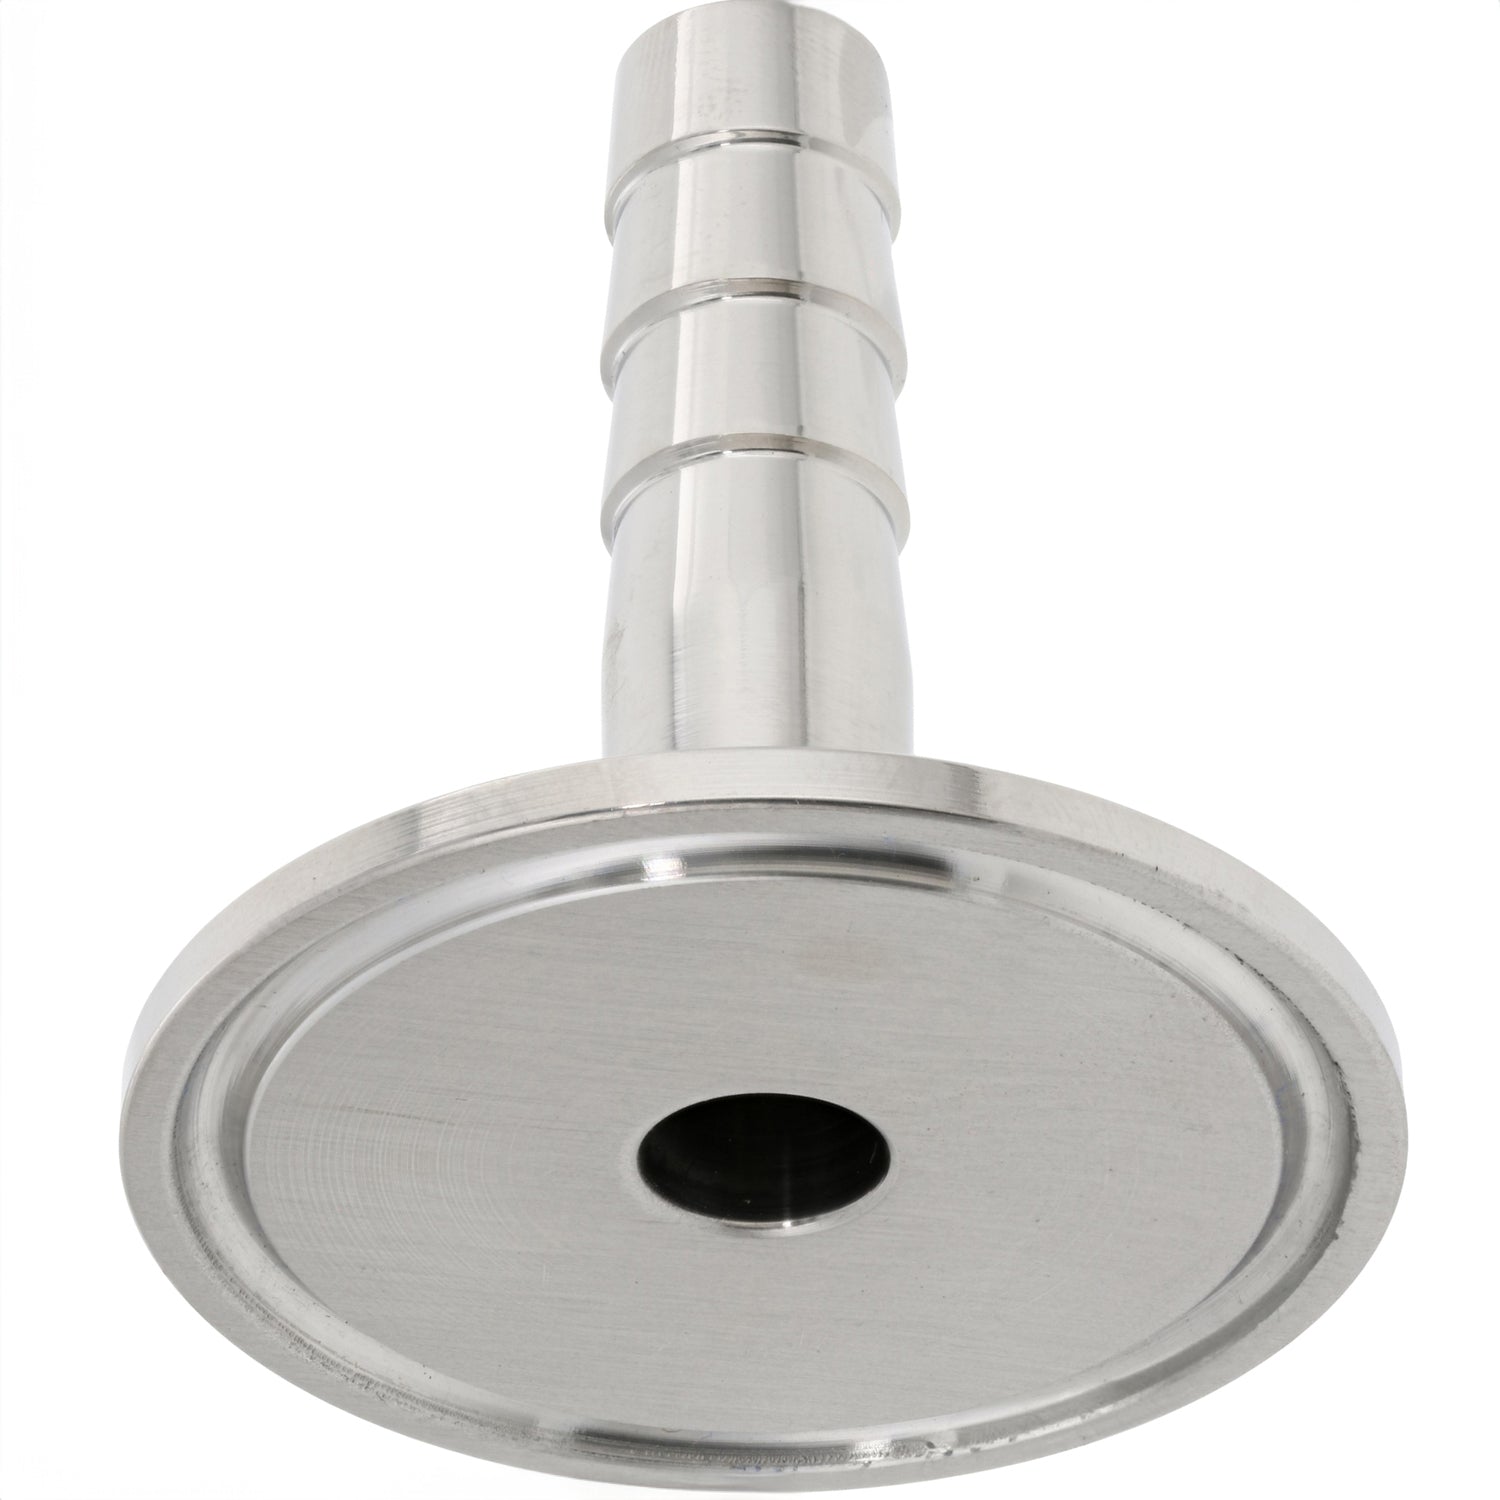 A stainless steel barbed pipe fitting with a central hole shown on a white background. 